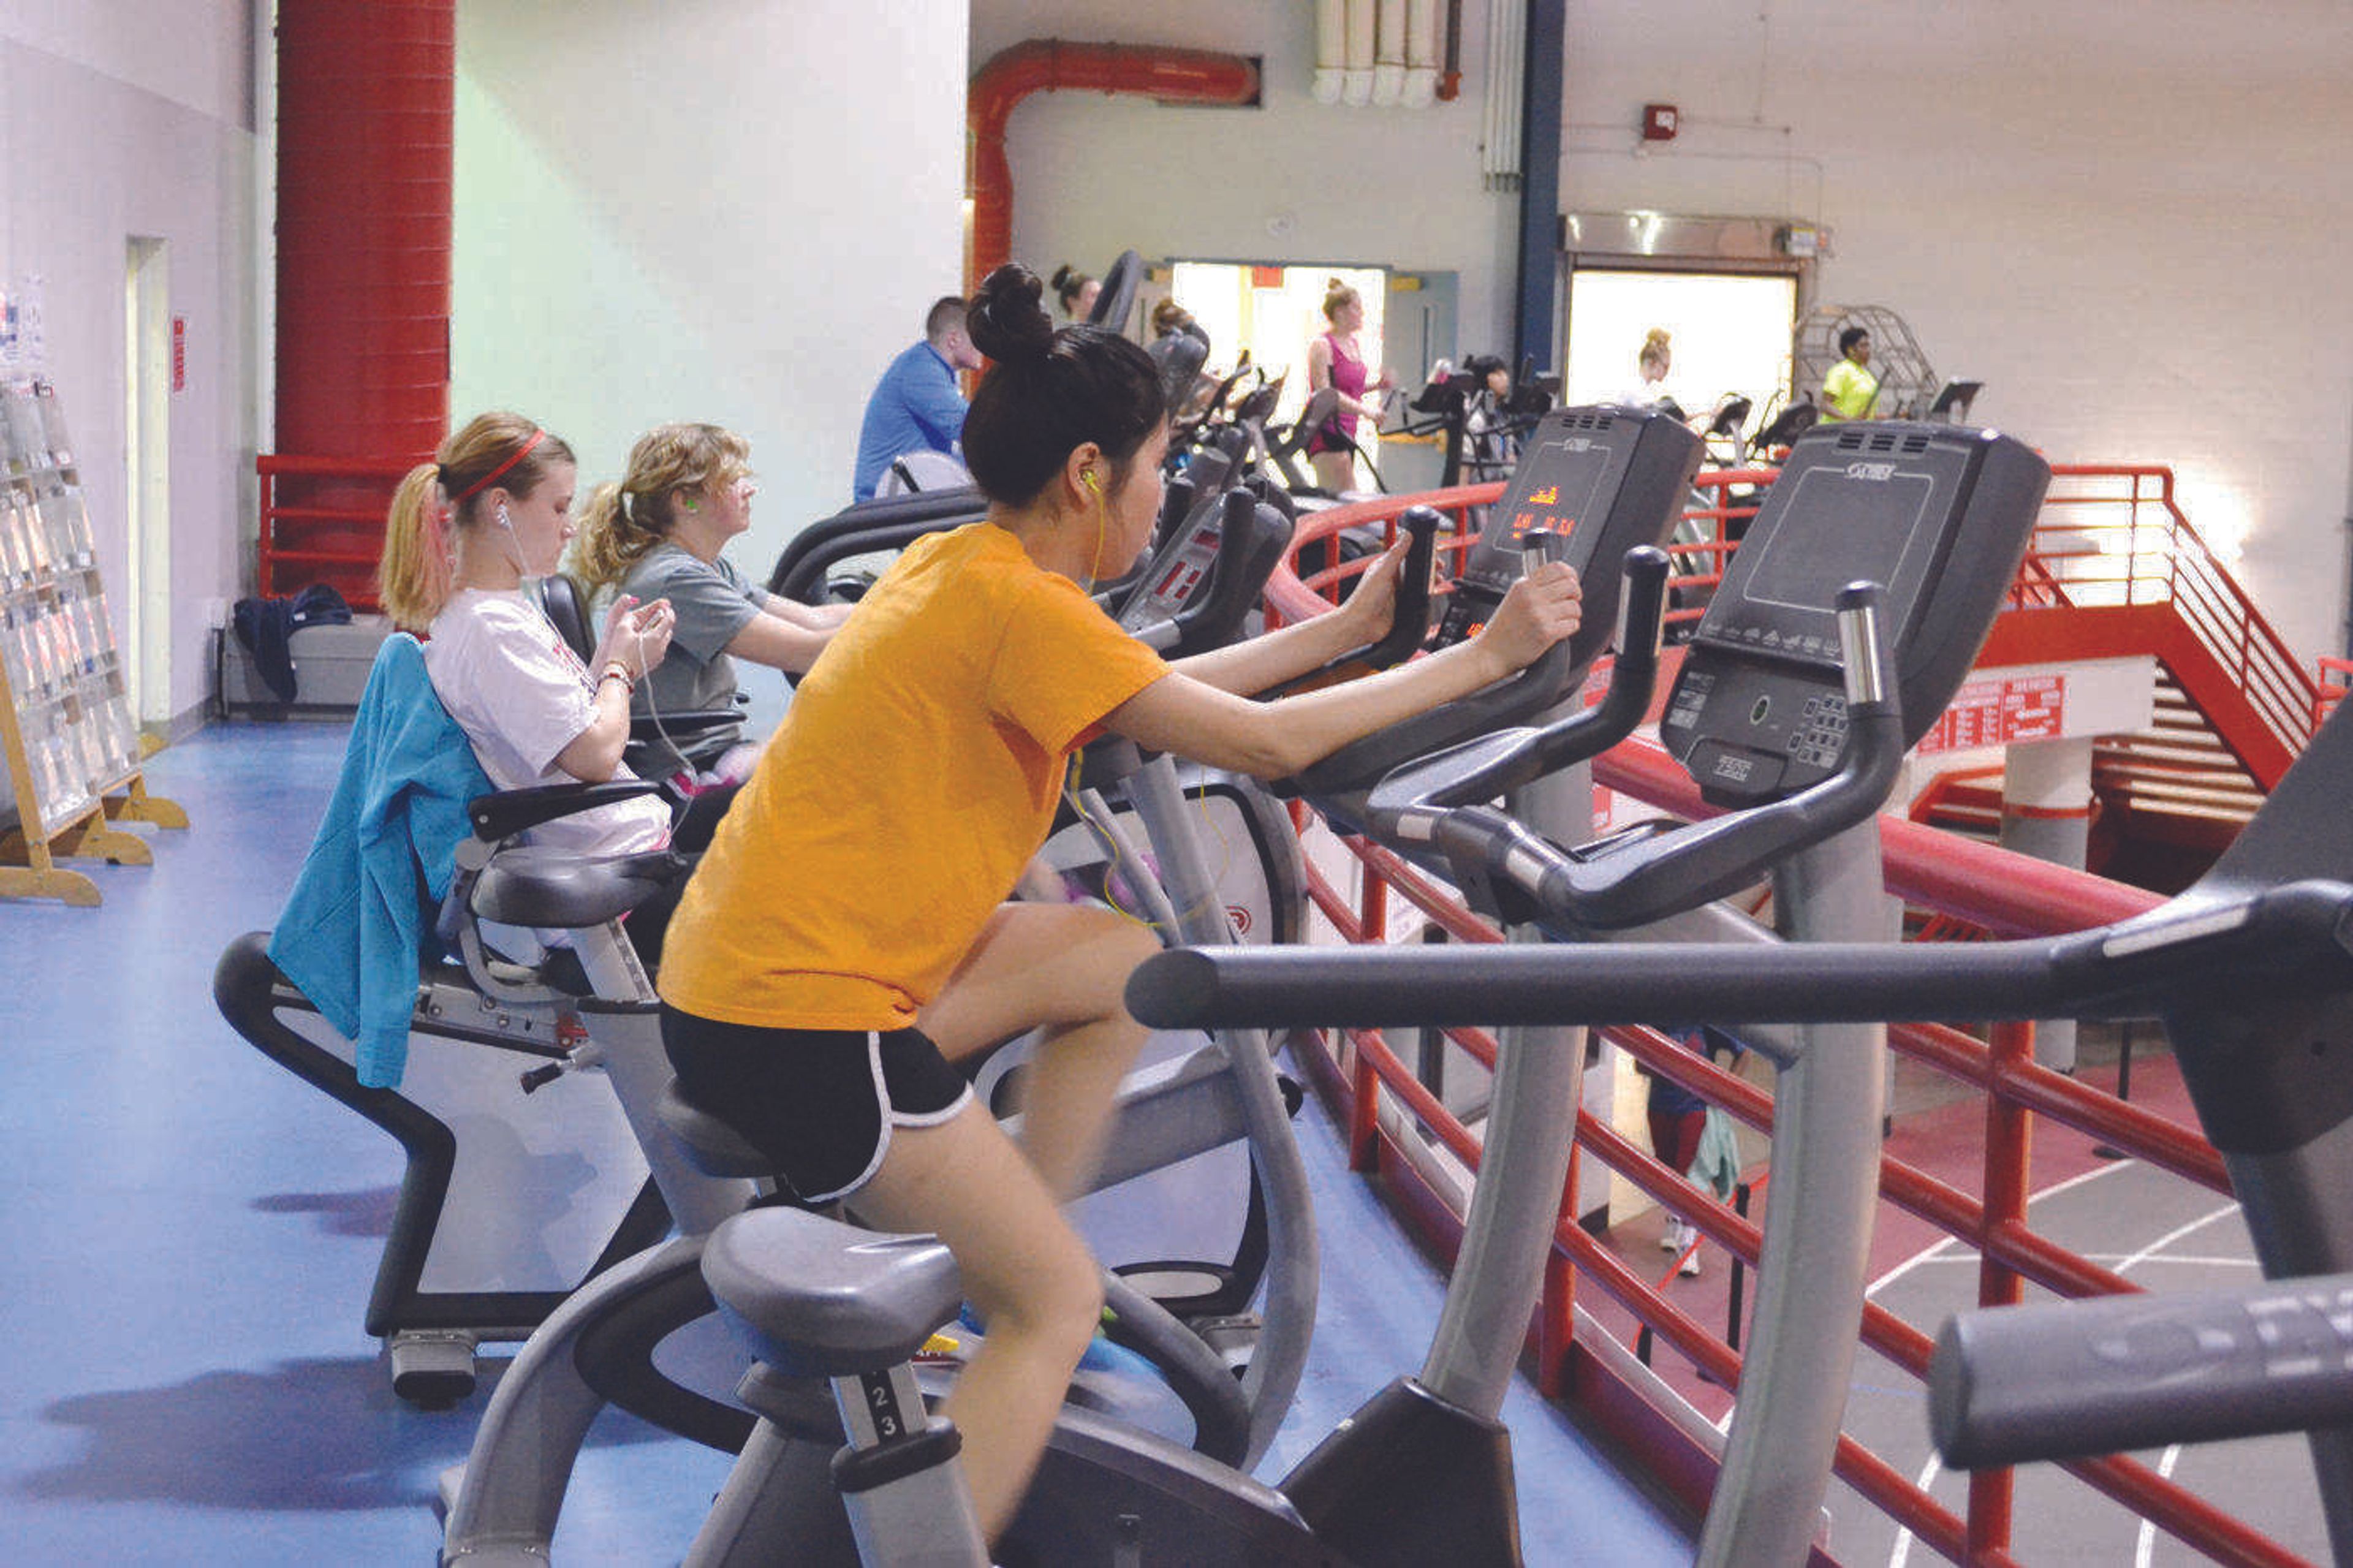 Participants record 100 miles before end of semester